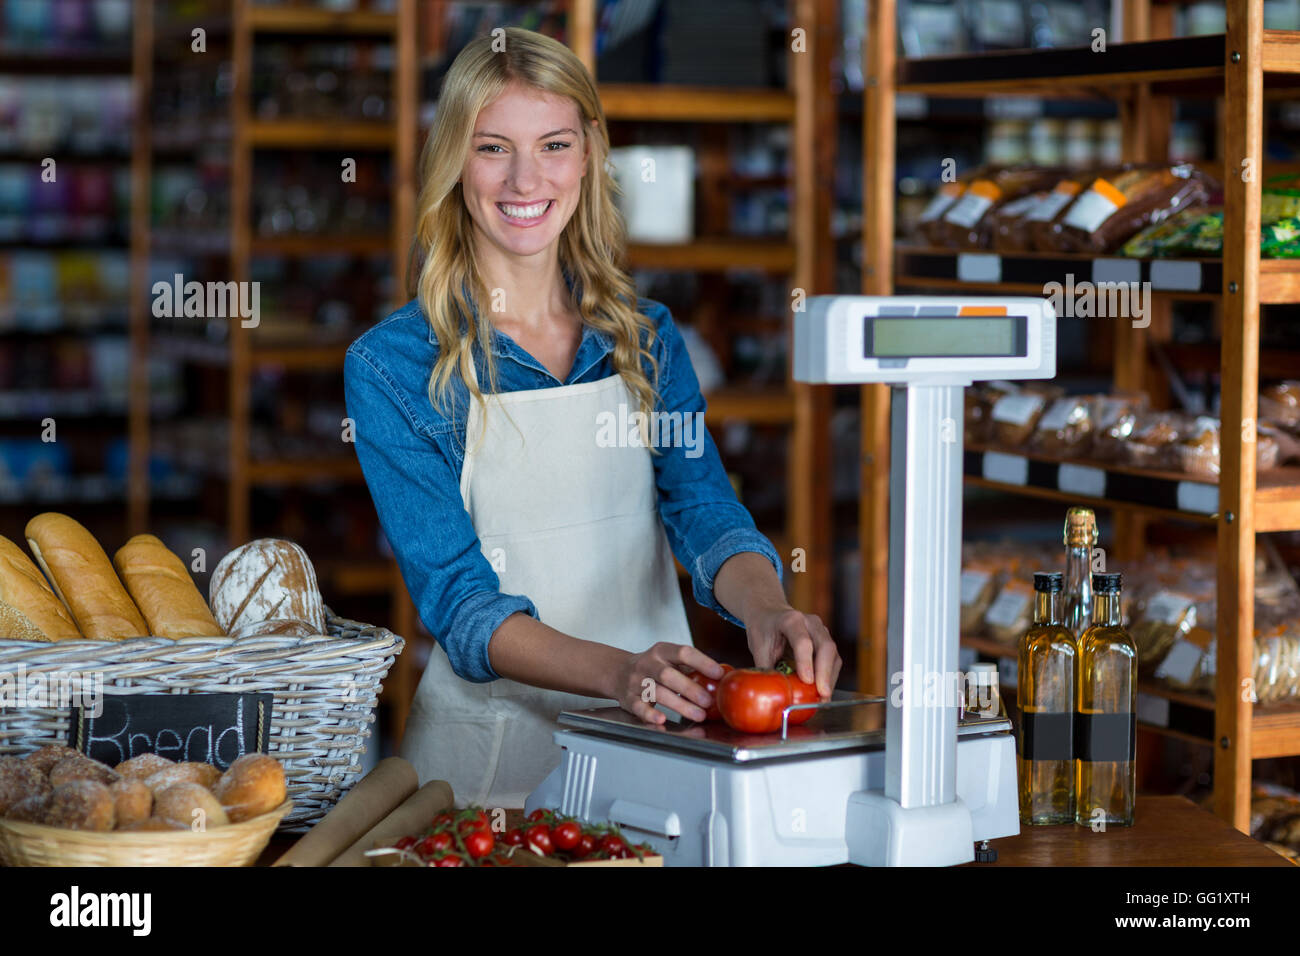 Smiling female staff weighting vegetables on scale in supermarket Stock Photo